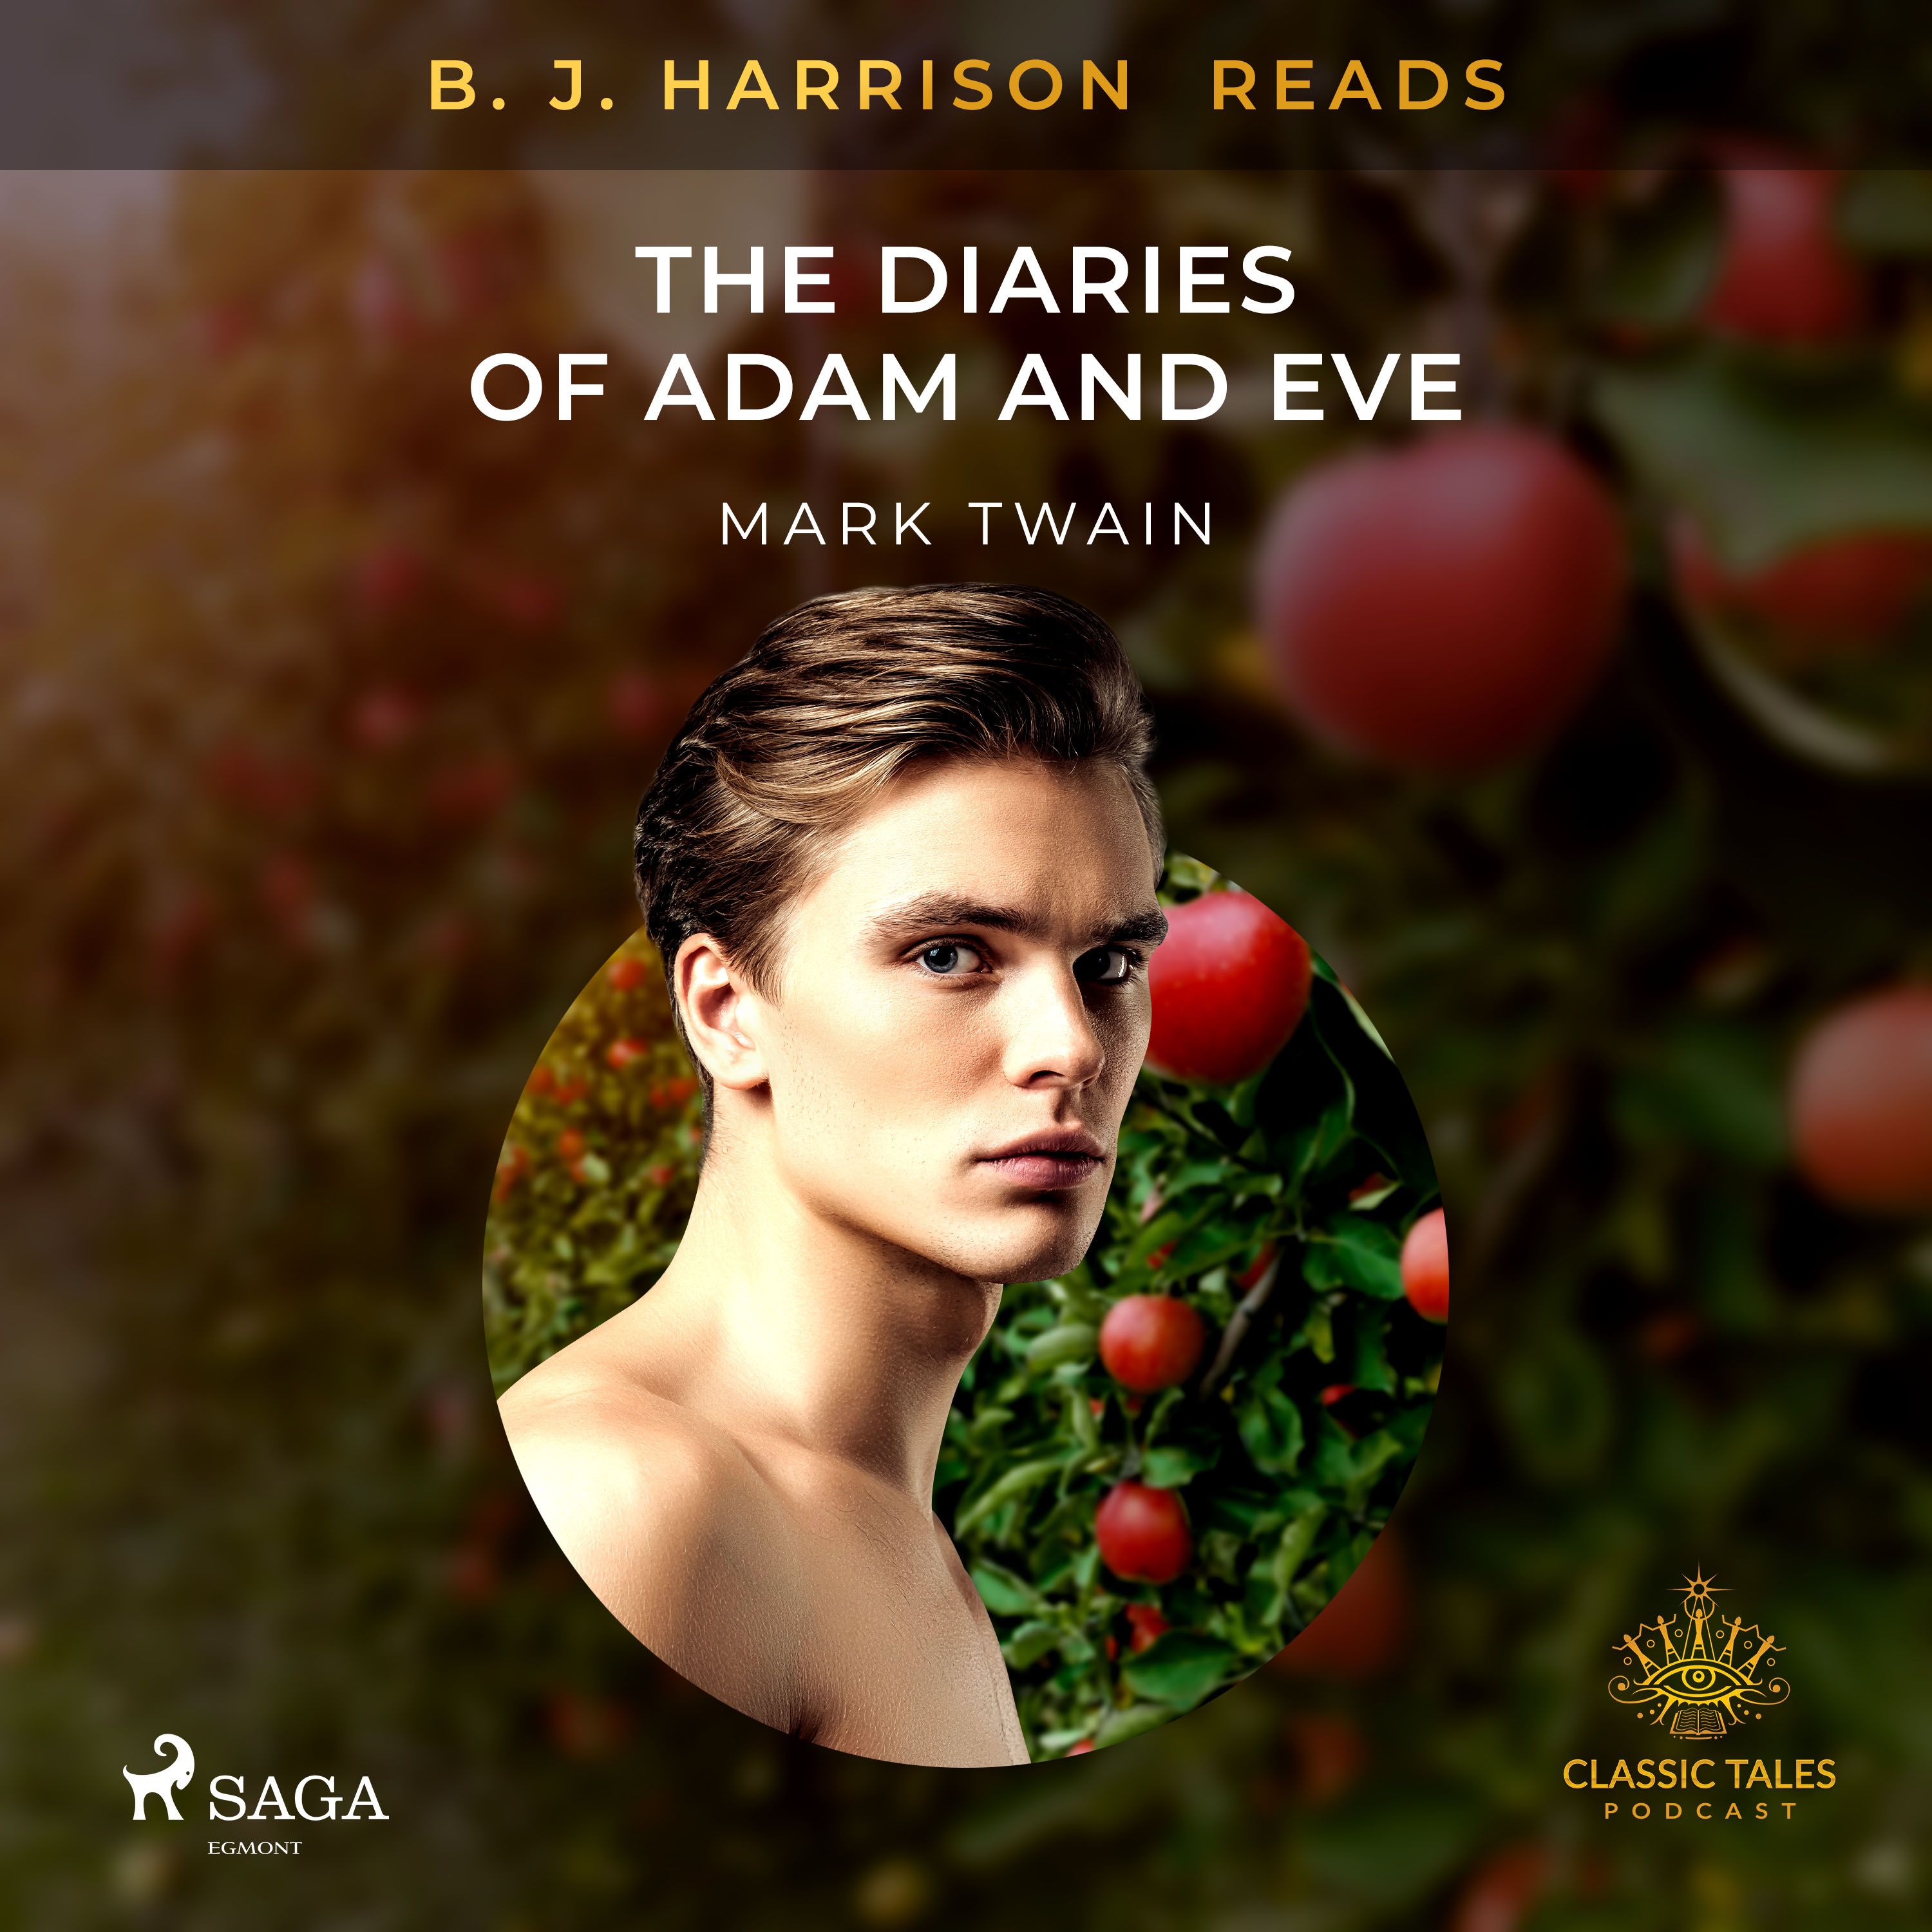 B. J. Harrison Reads The Diaries of Adam and Eve, audiobook by Mark Twain